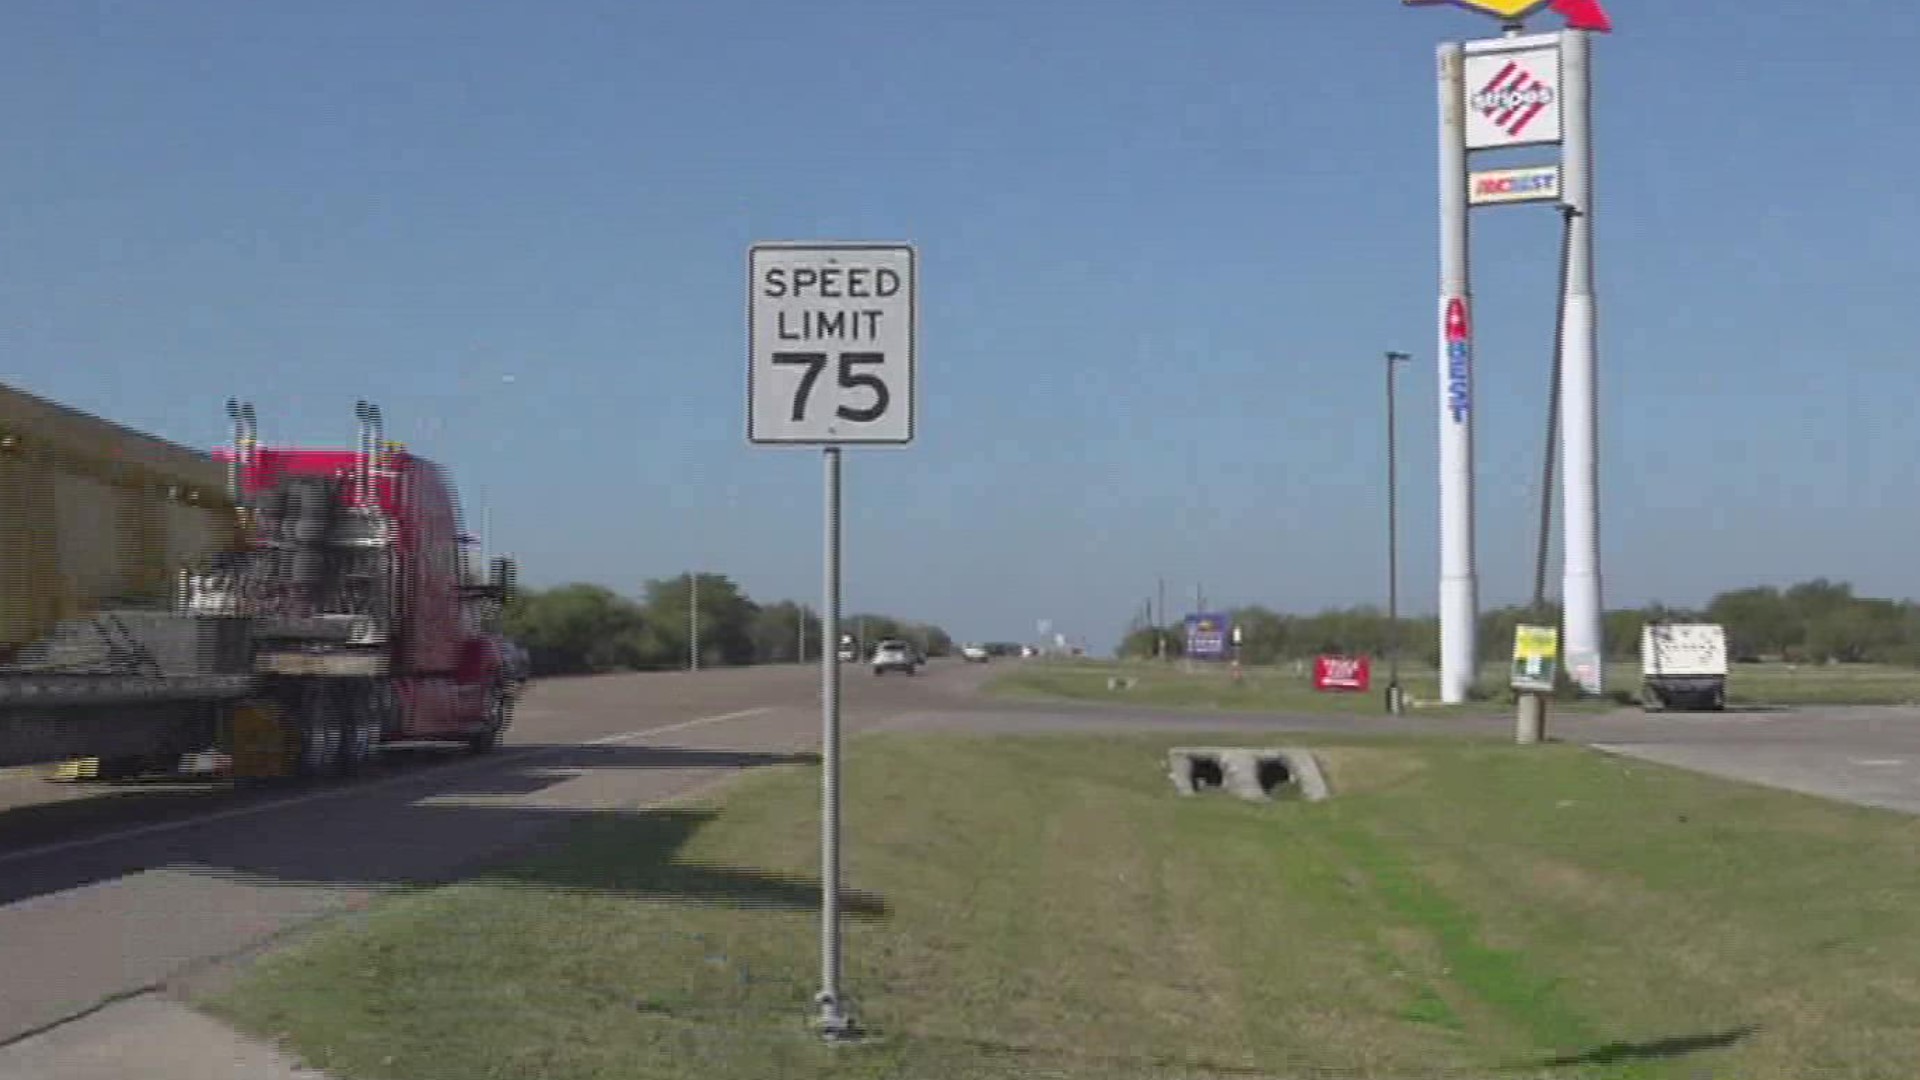 Kleberg County Judge Rudy Madrid told 3NEWS that he is working on solutions to improve safety conditions in the area.